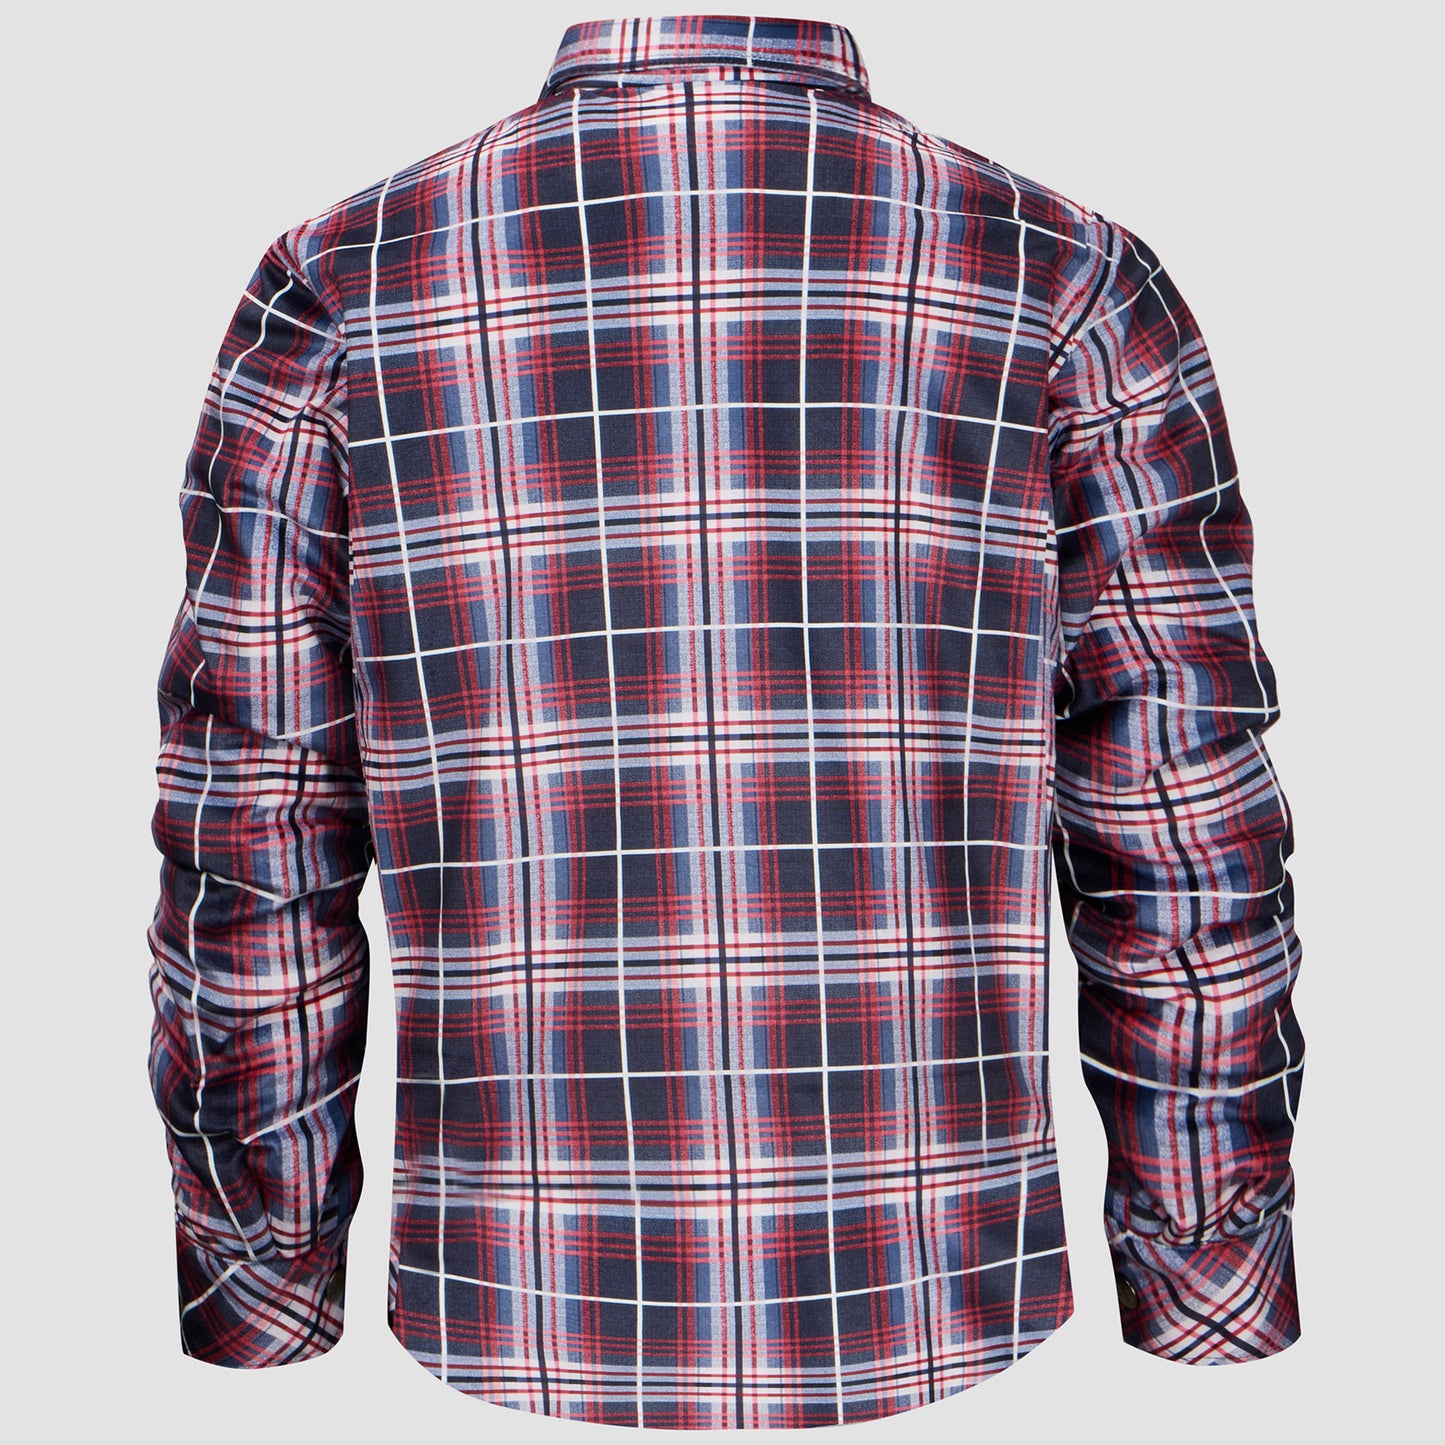 Flannel Plaid Button Shirt Lumber Jacket - White Red